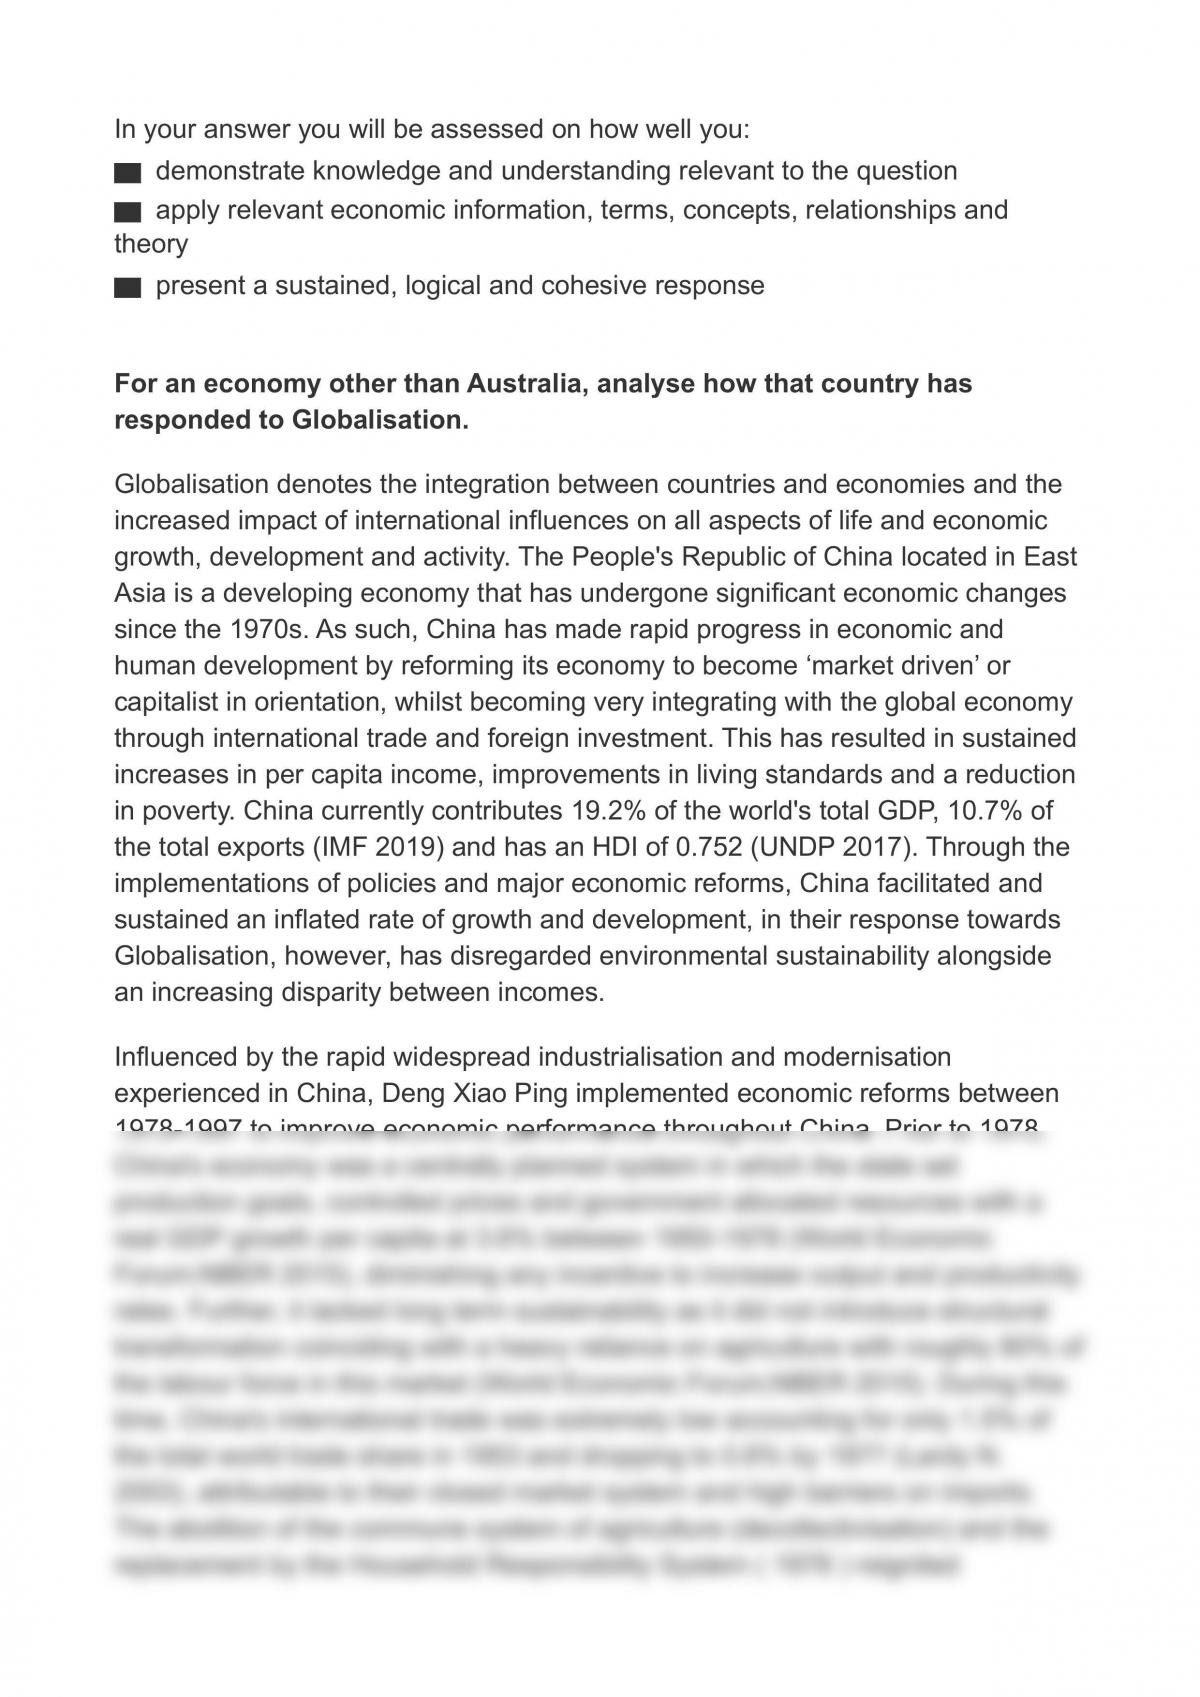 short essay about china